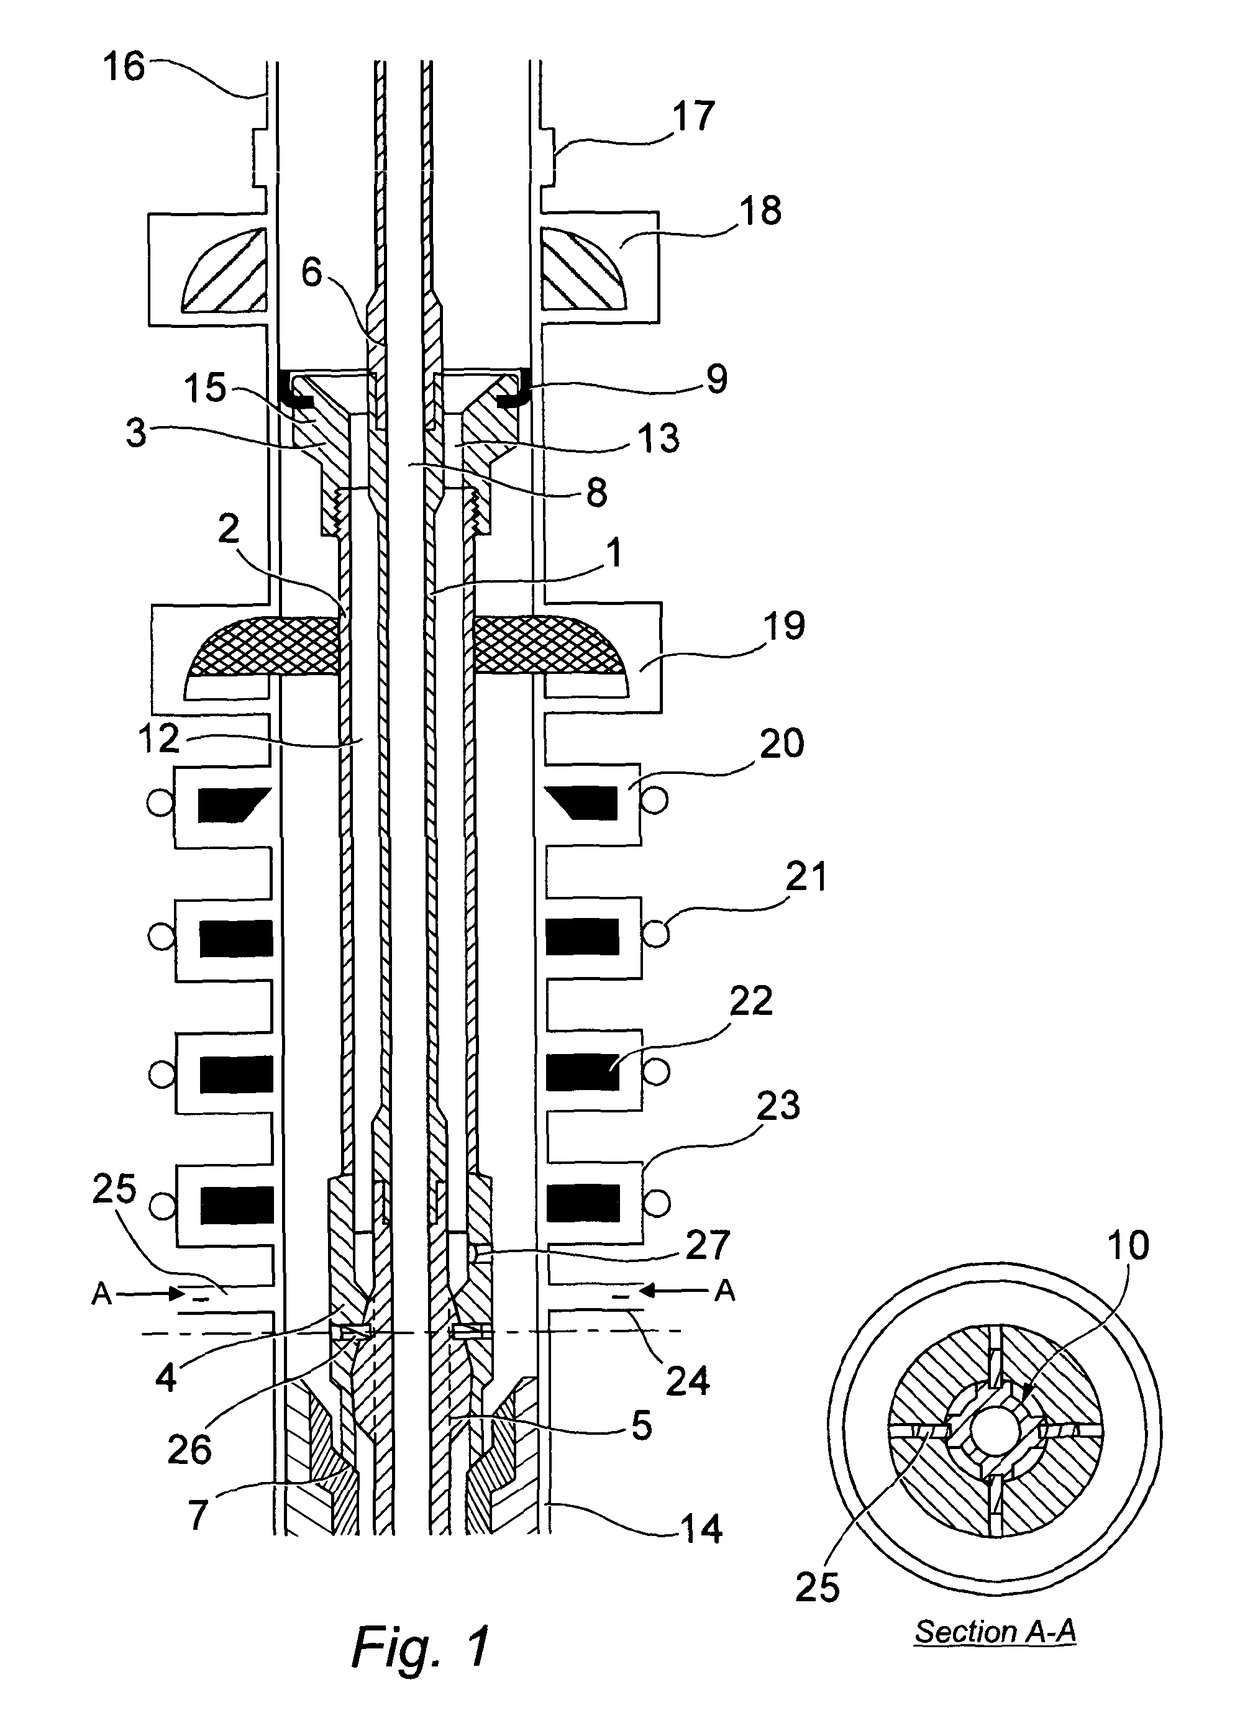 Retrievable subsea device and method